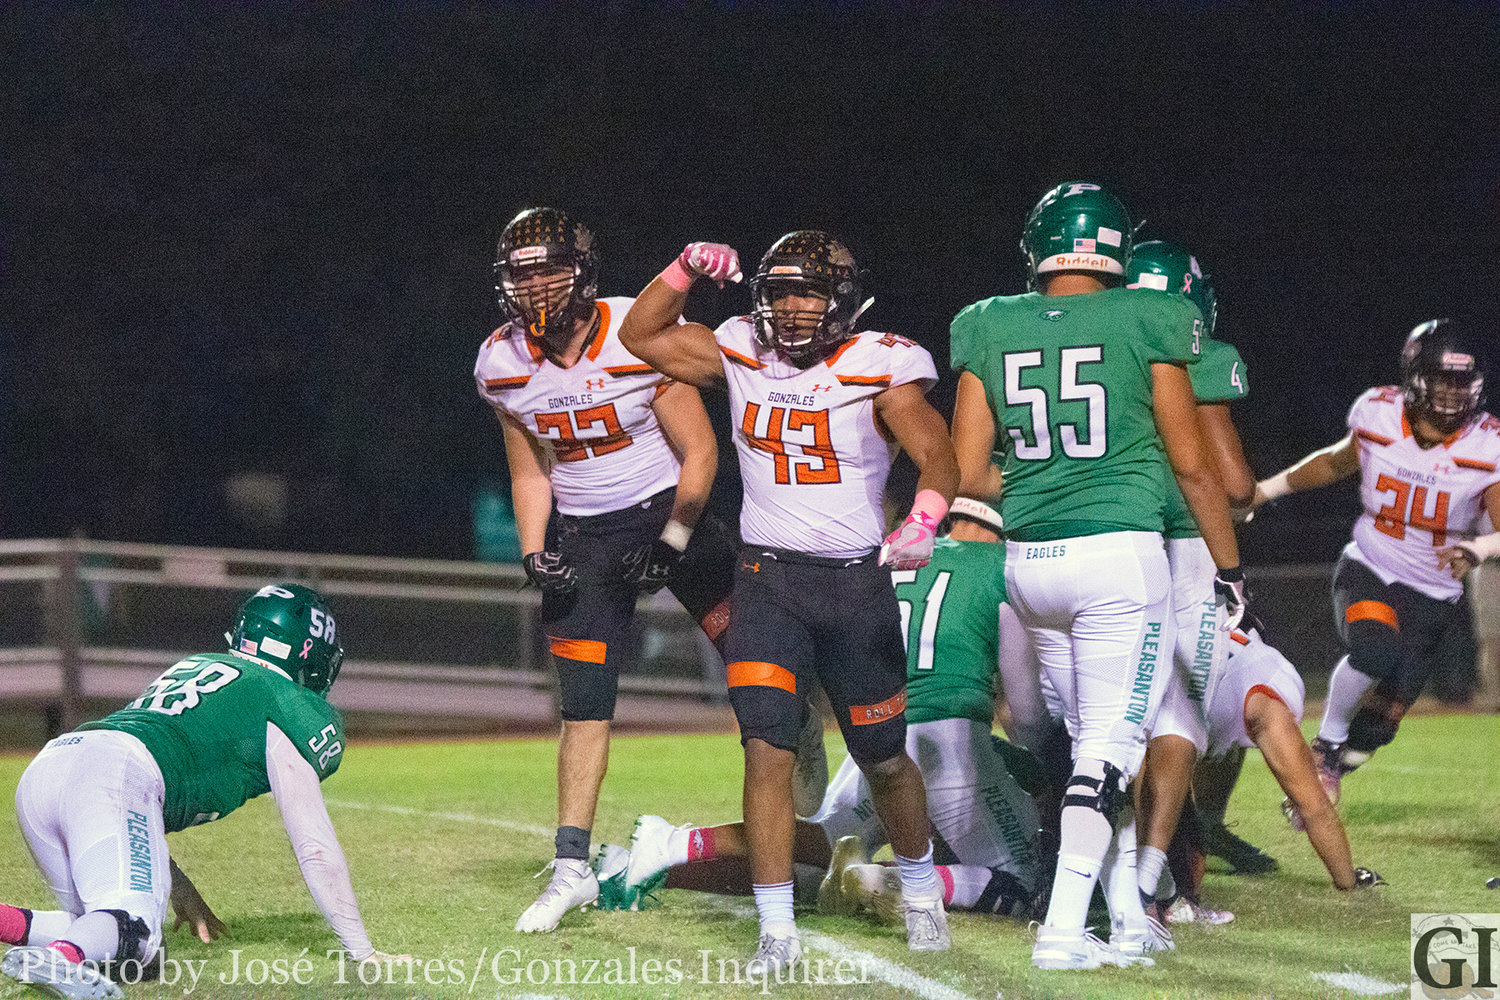 Jared Esparza (43) flexes after an Apache defensive stop in Gonzales' 37-36 overtime win over Pleasanton.